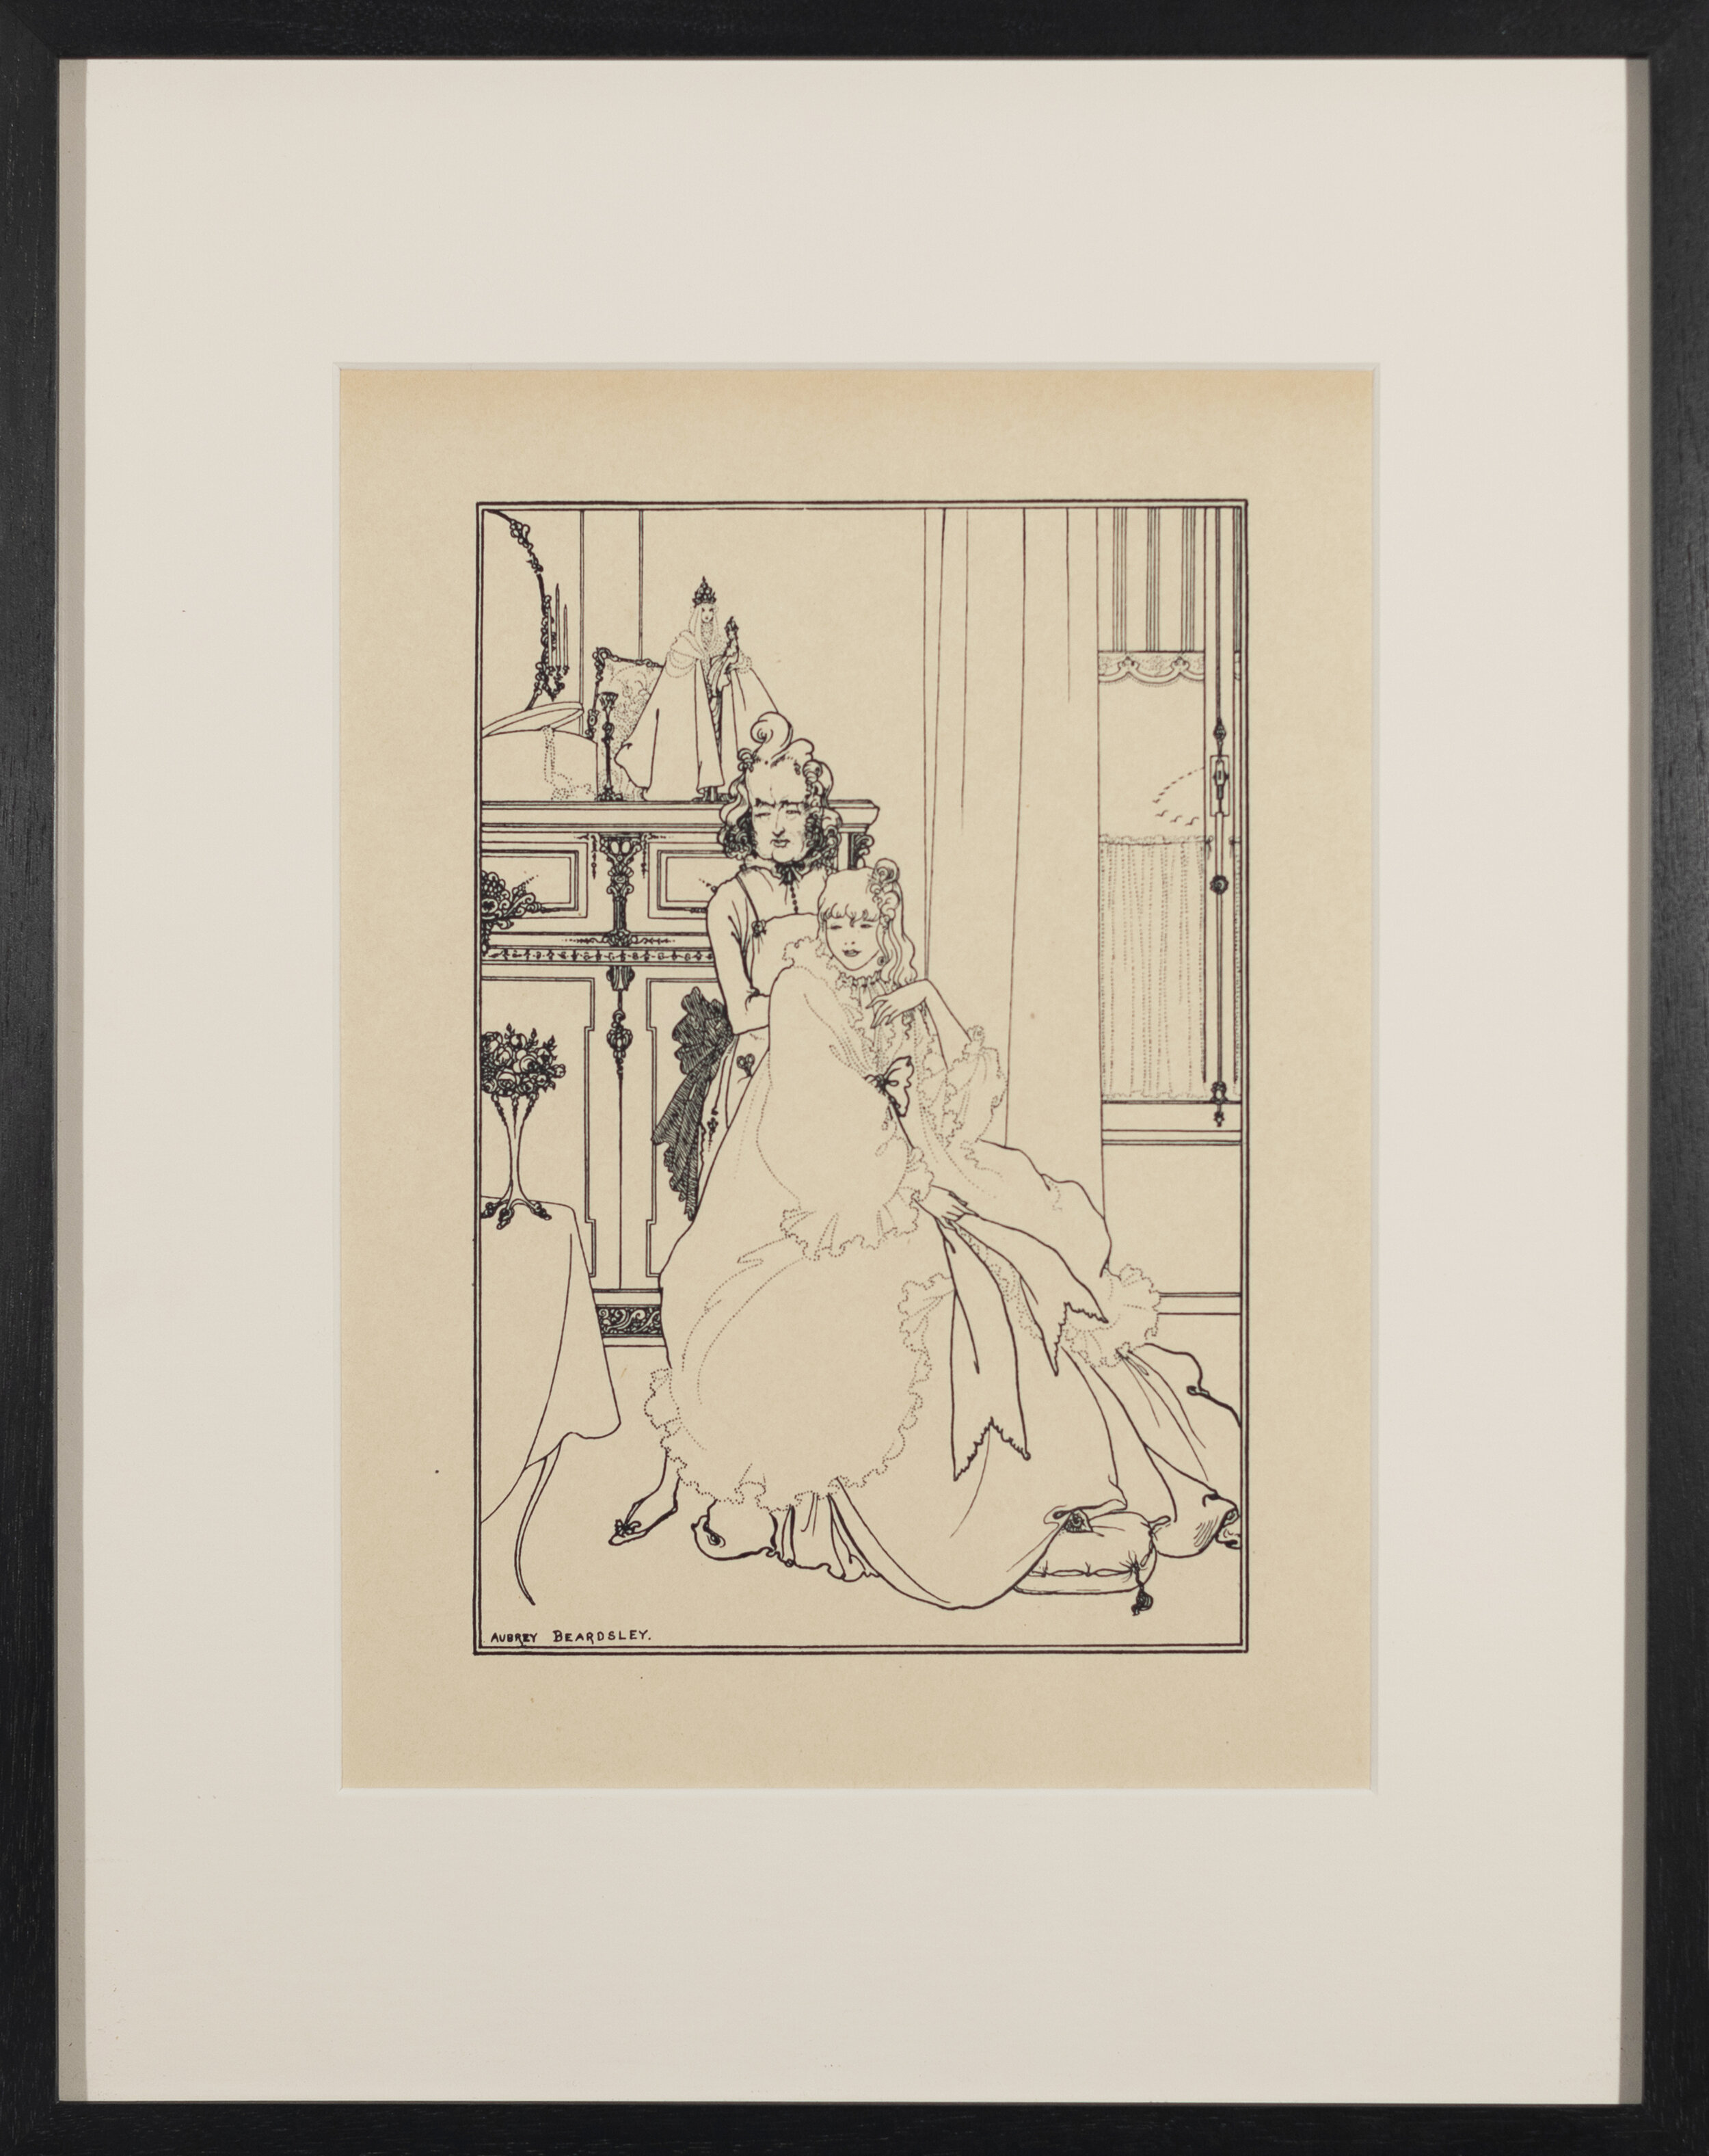  Aubrey Beardsley, Illustration titled The Coiffing. Printed in No. 3 of “The Savoy,” page 90, ca. 1896, magazine page, 14 3/4" × 11 3/4" (framed) 